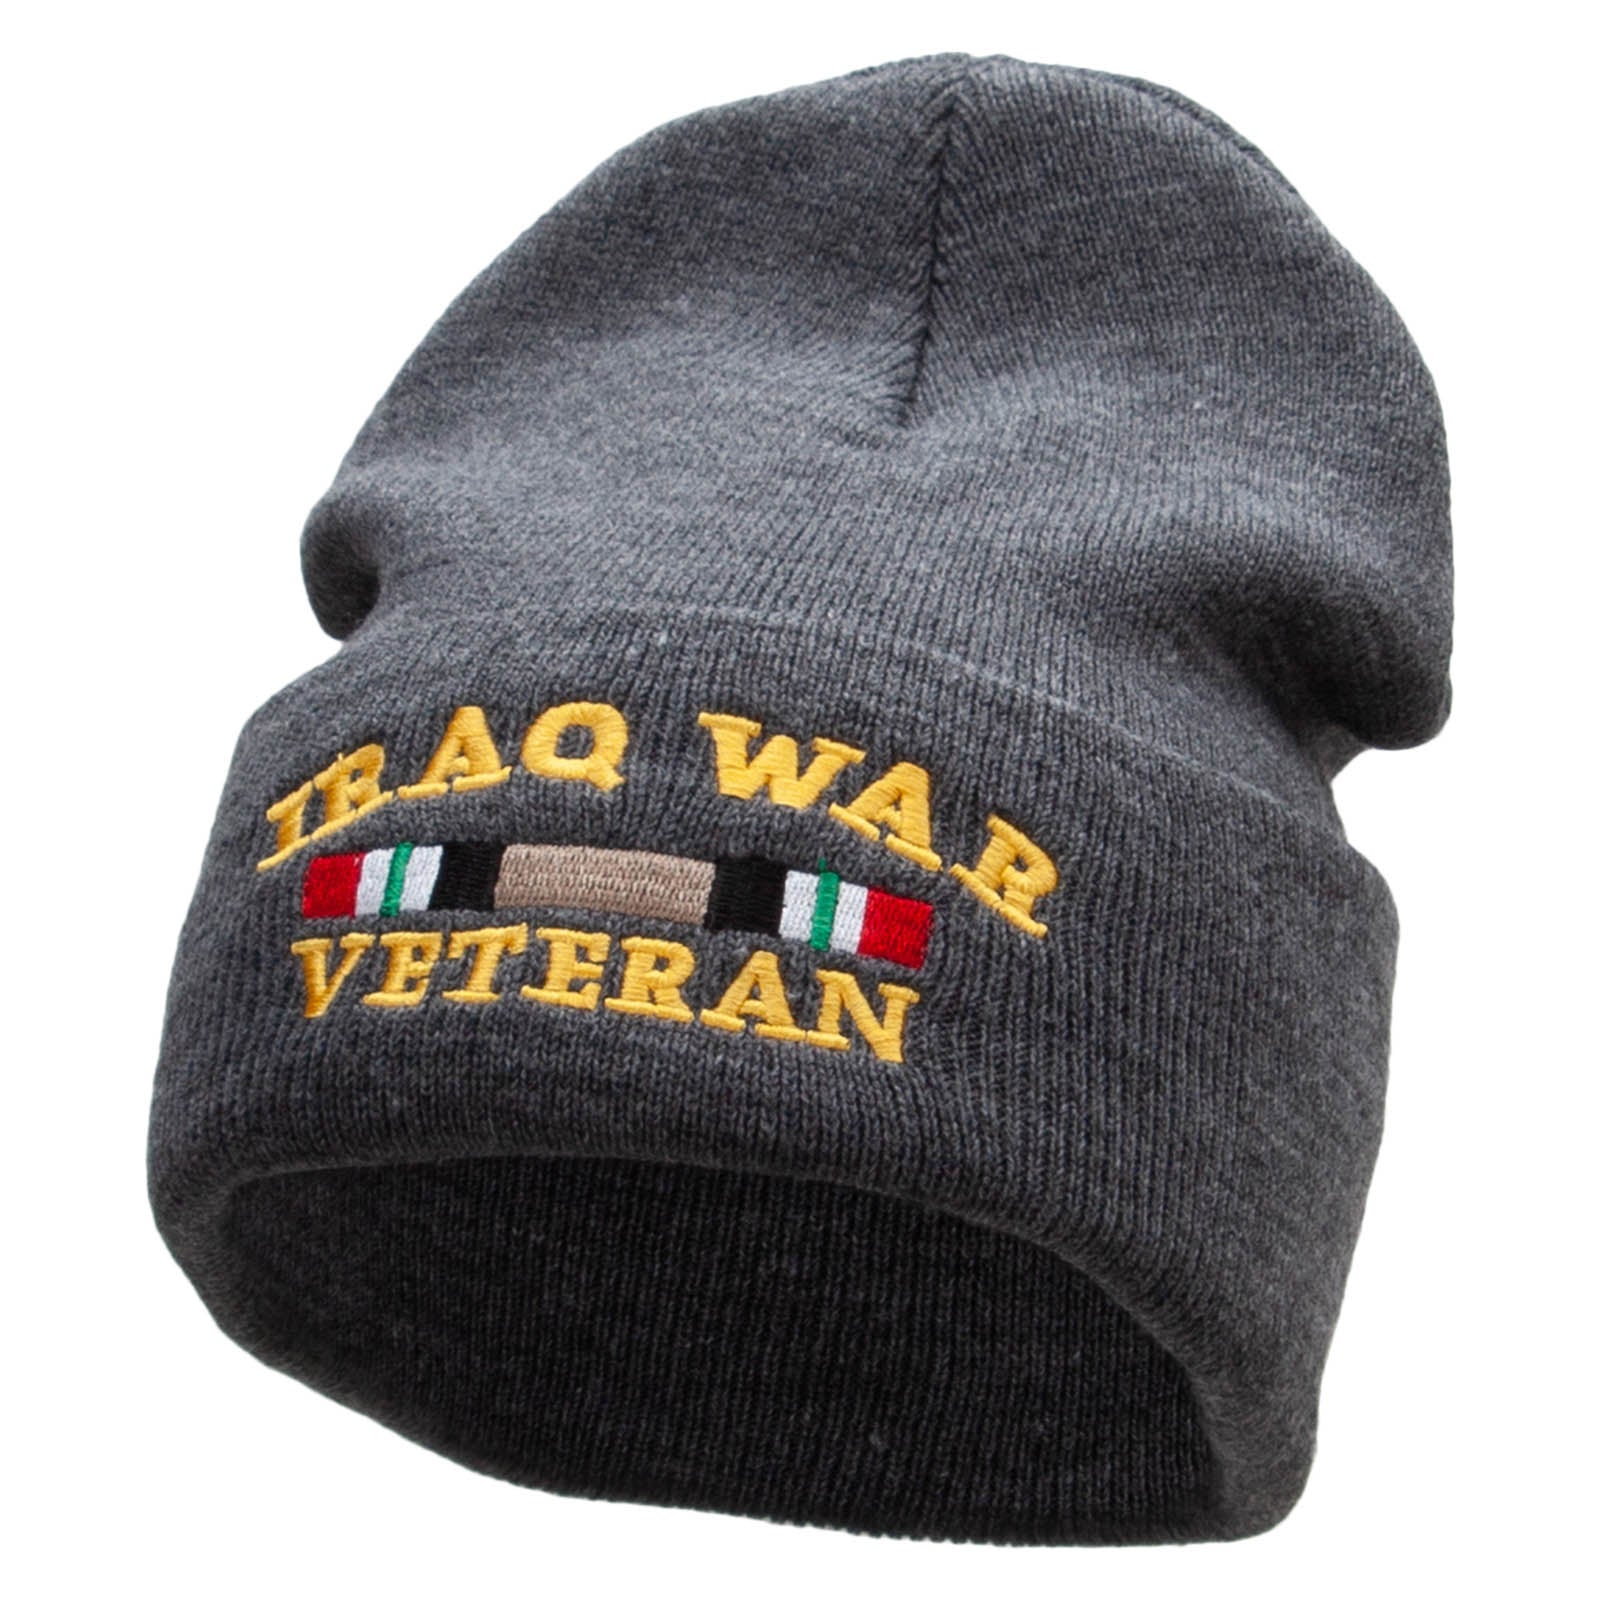 Iraq War Ribbon Embroidered 12 Inch Solid Knit Cuff Long Beanie Made in USA - Charcoal OSFM